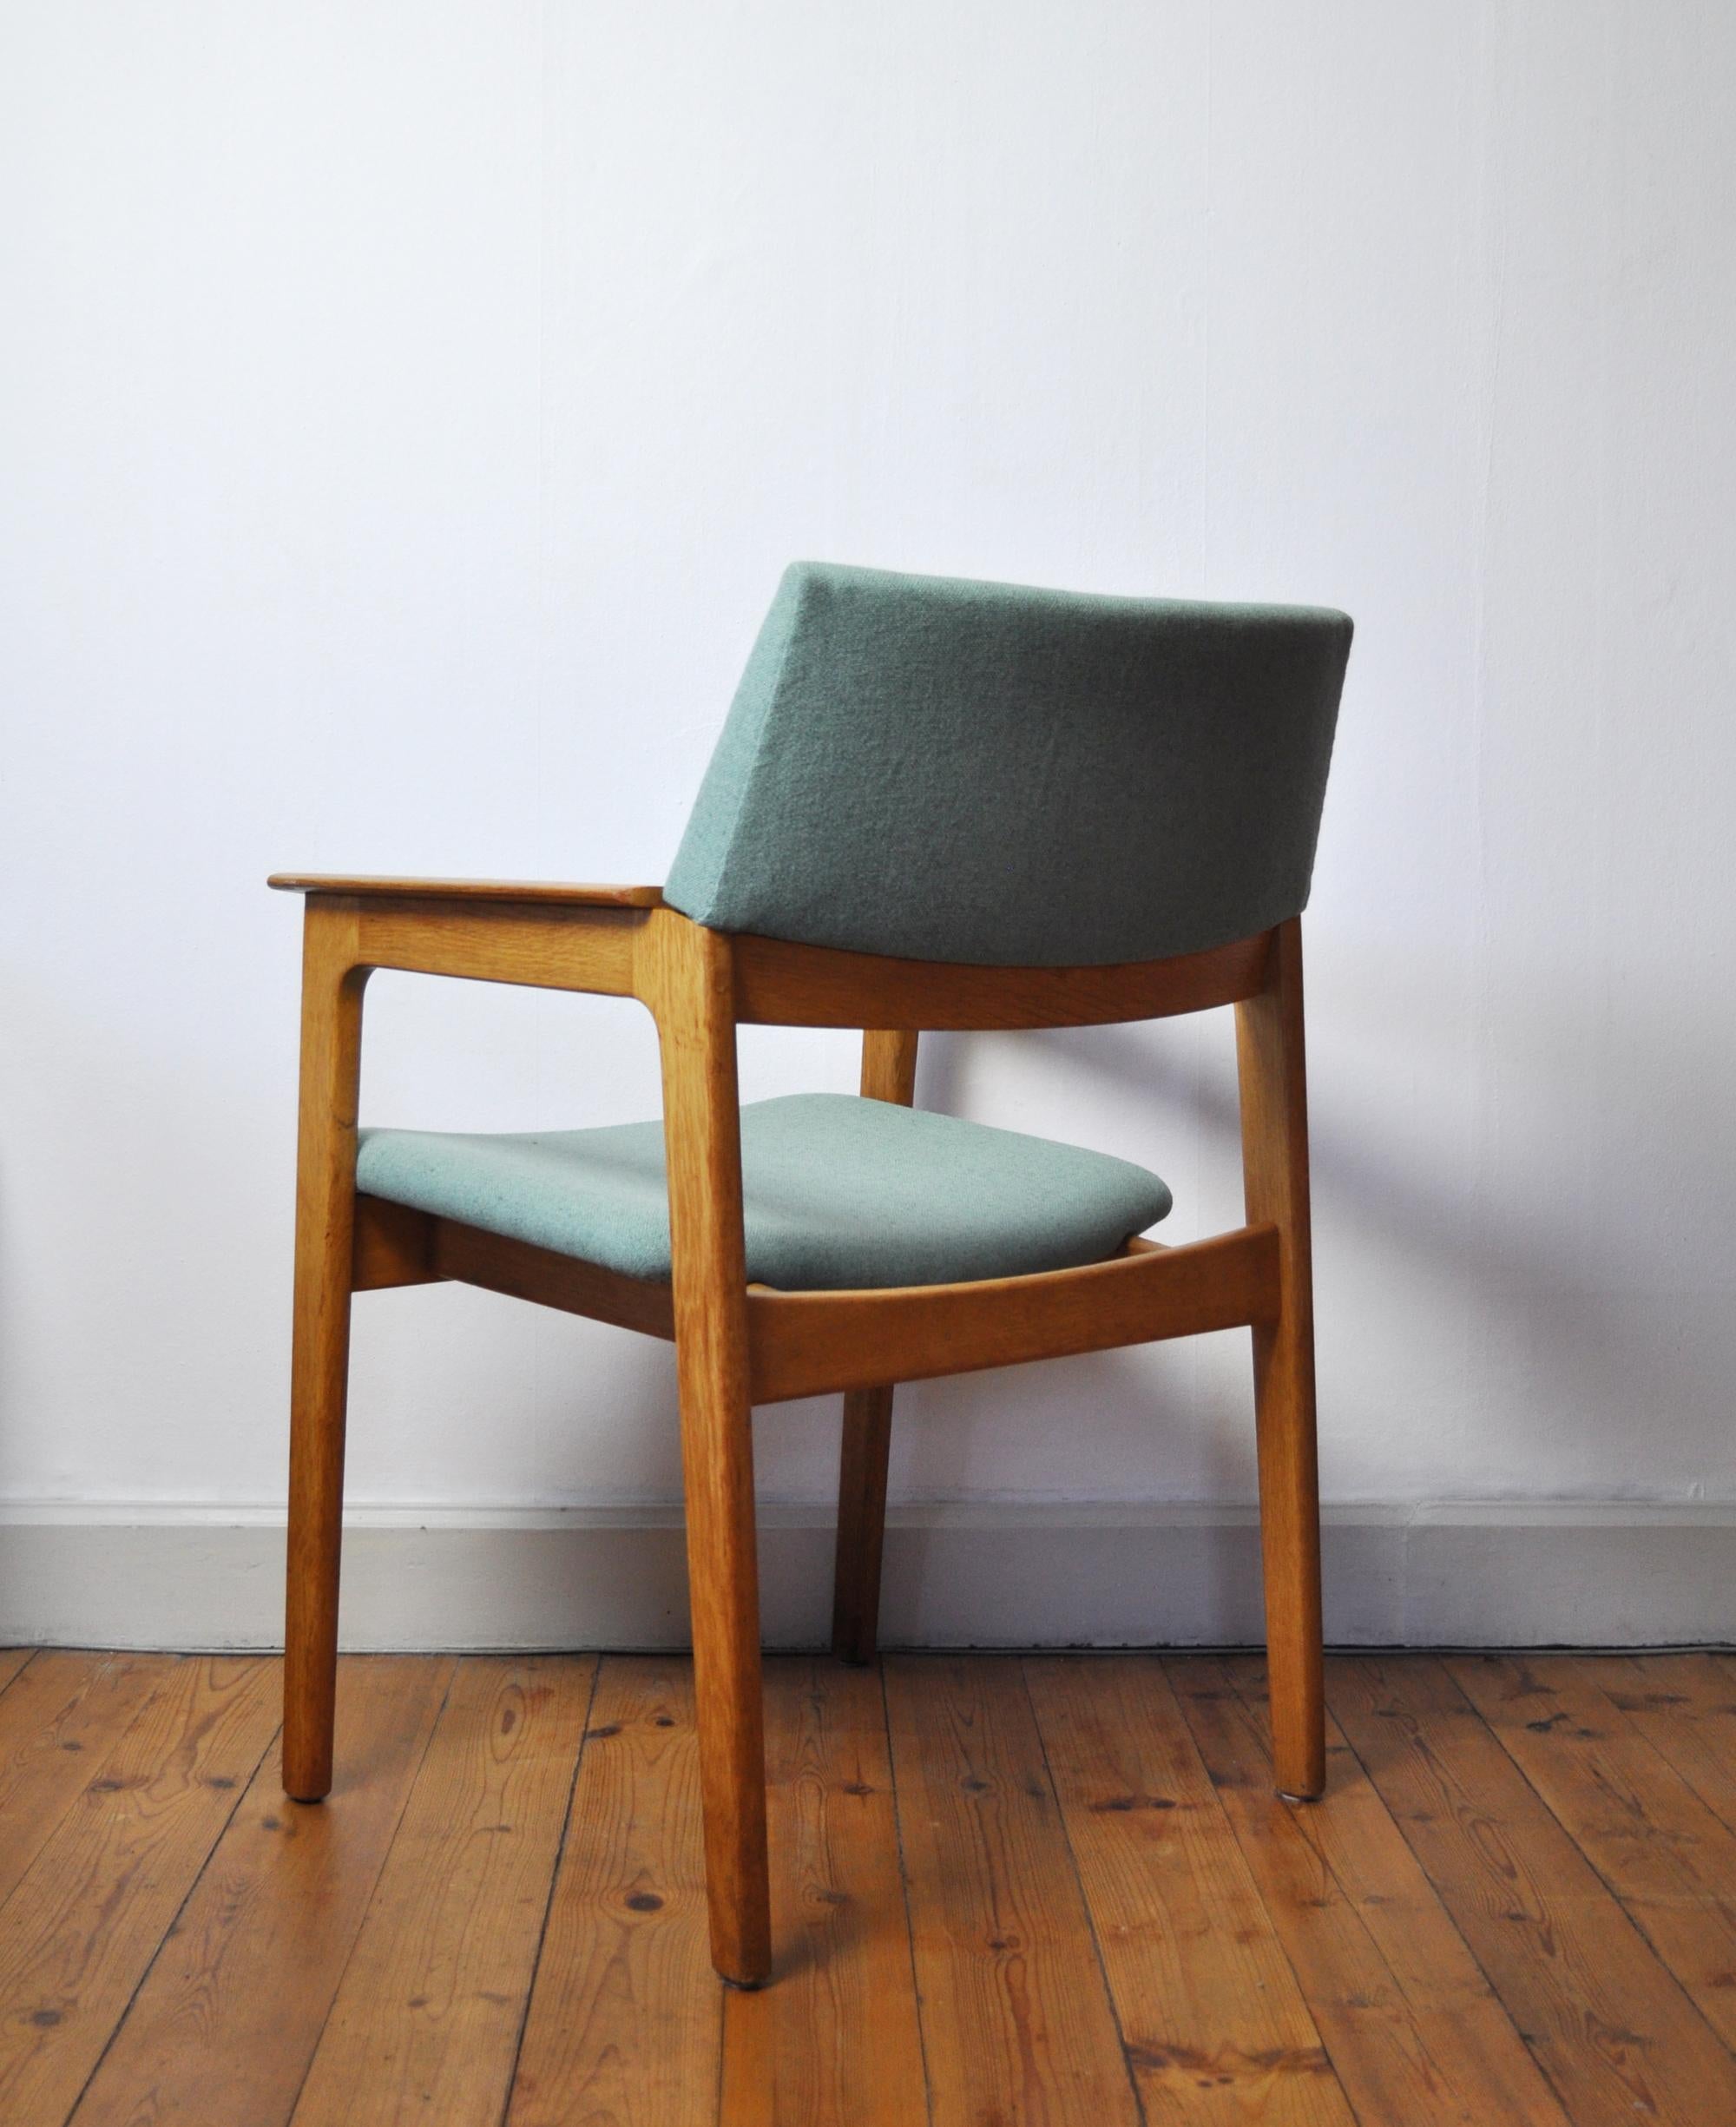 20th Century Danish Modern Armchair in Solid Oak with New Upholstery, 1960s For Sale